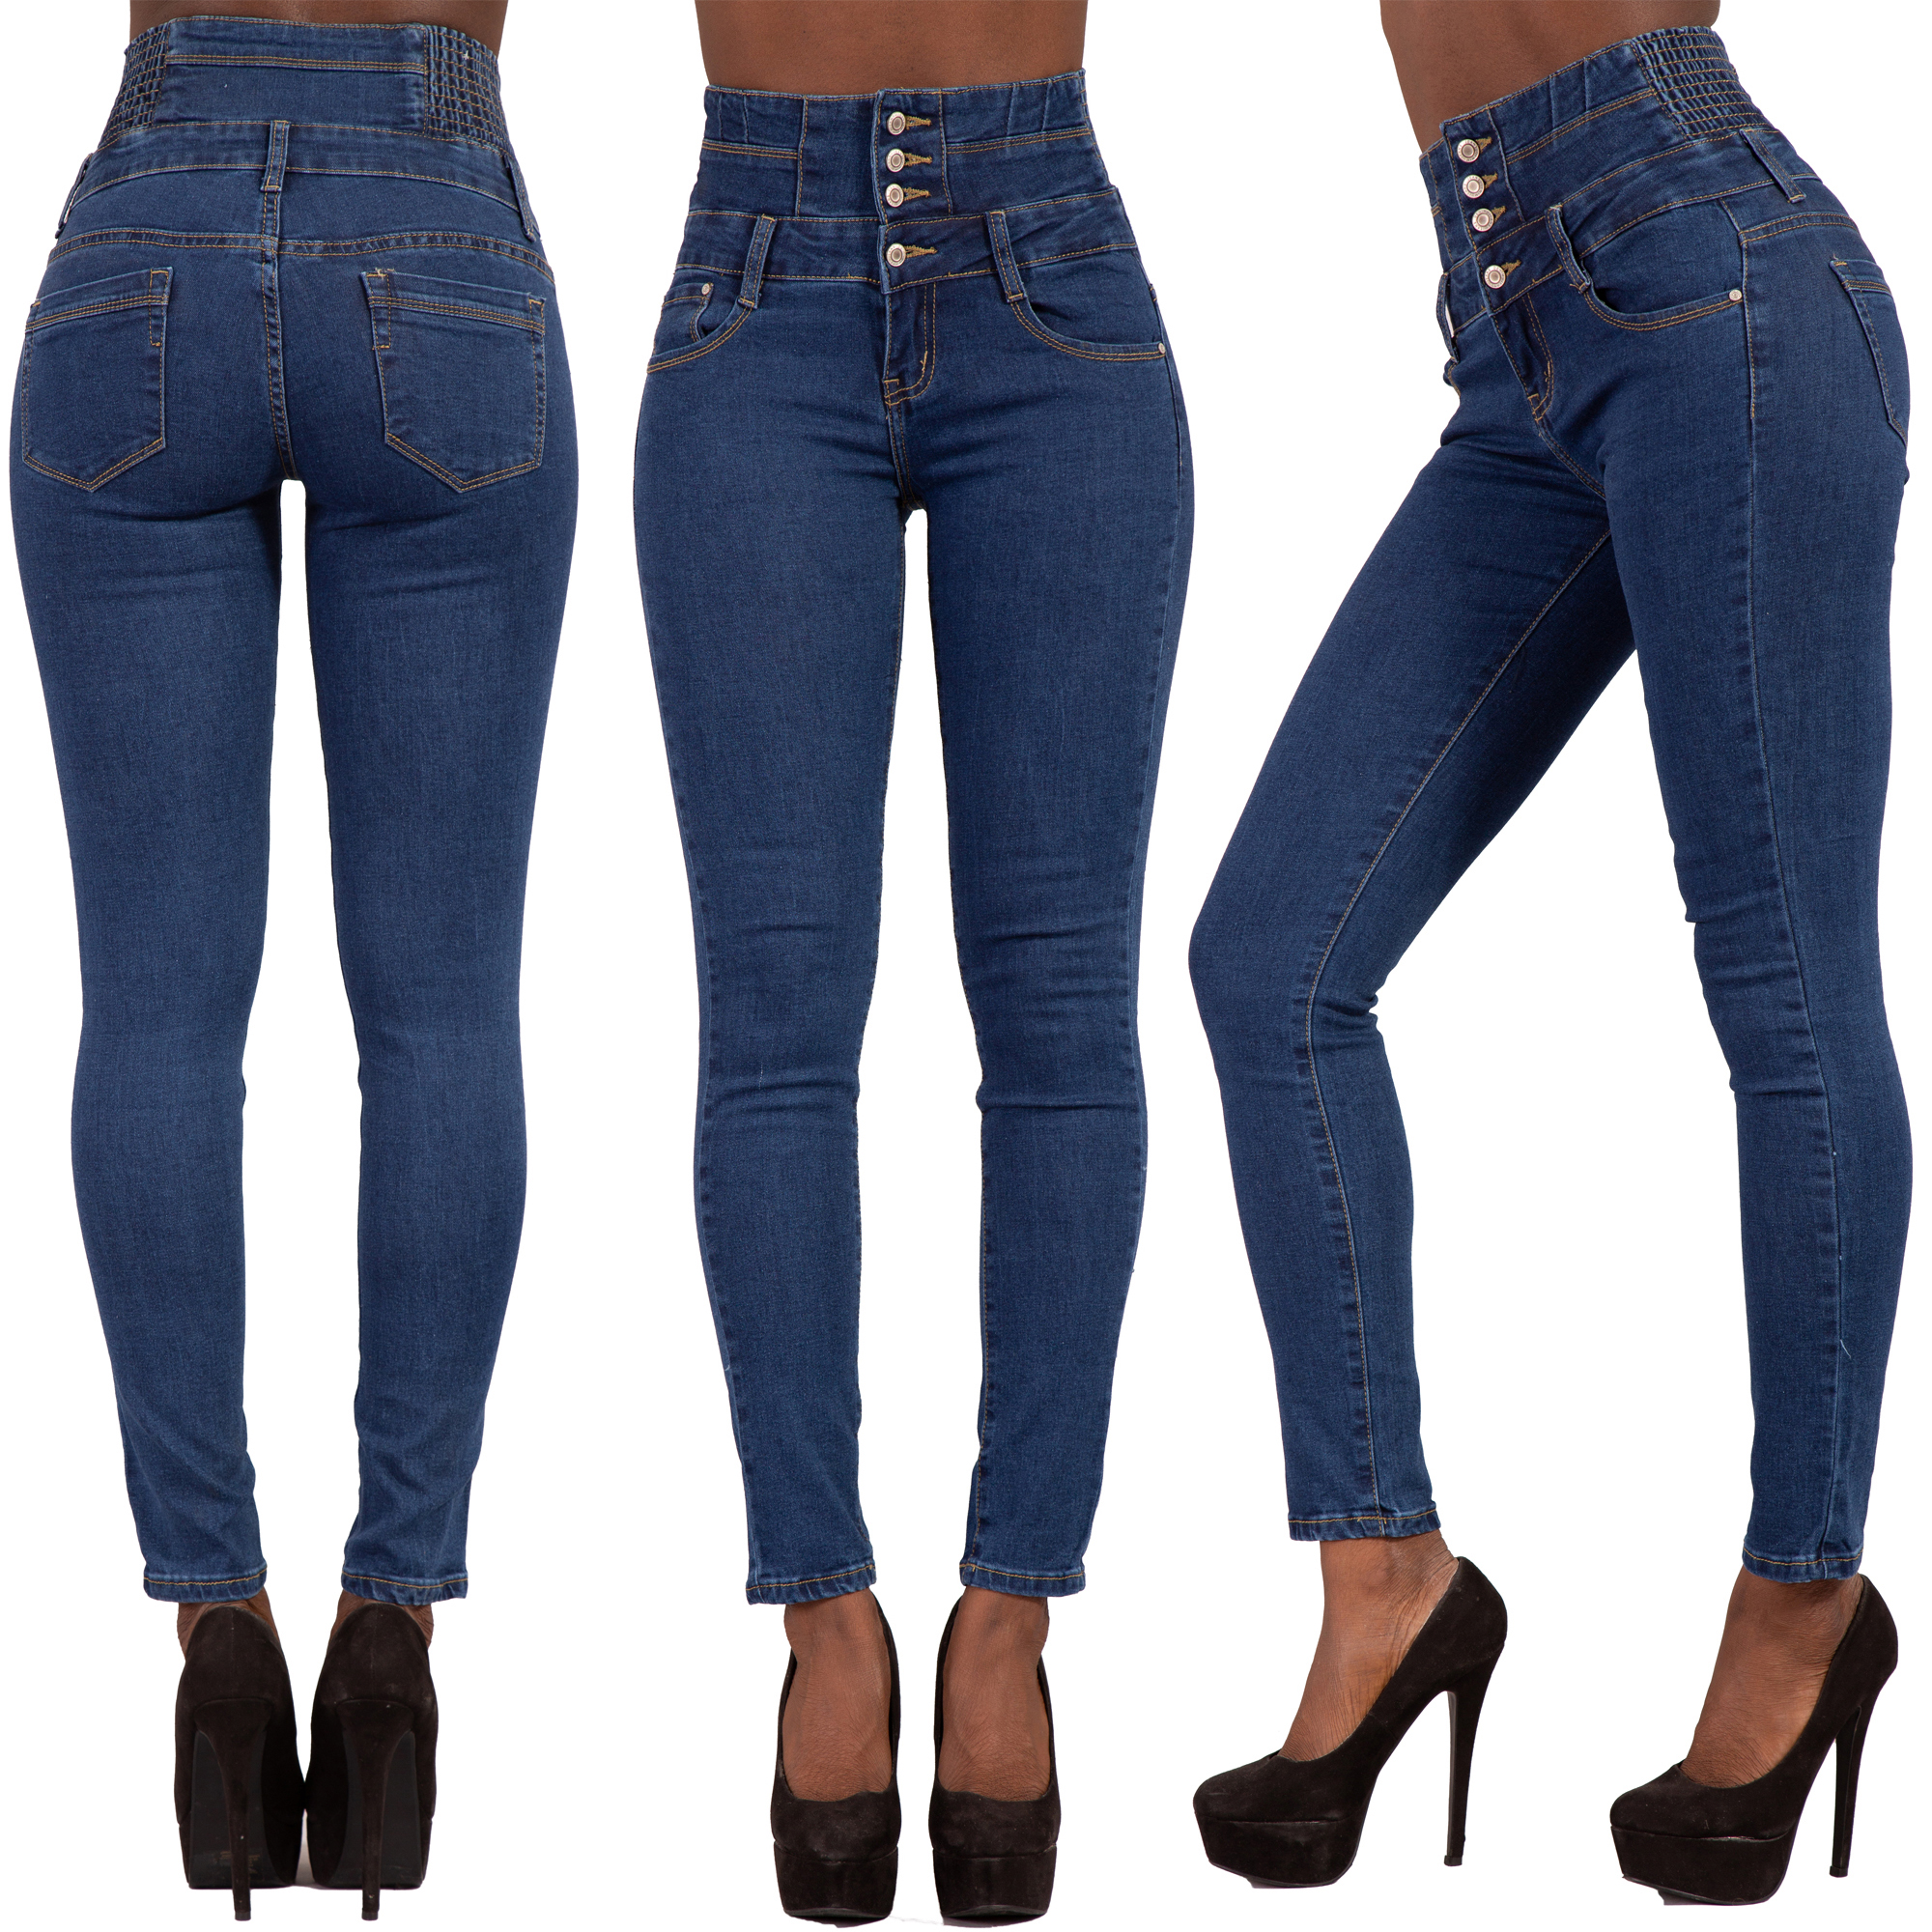 WOMENS HIGH WAIST PLUS SIZE SKINNY JEANS LADIES JEGGINGS PANTS size 10 ...